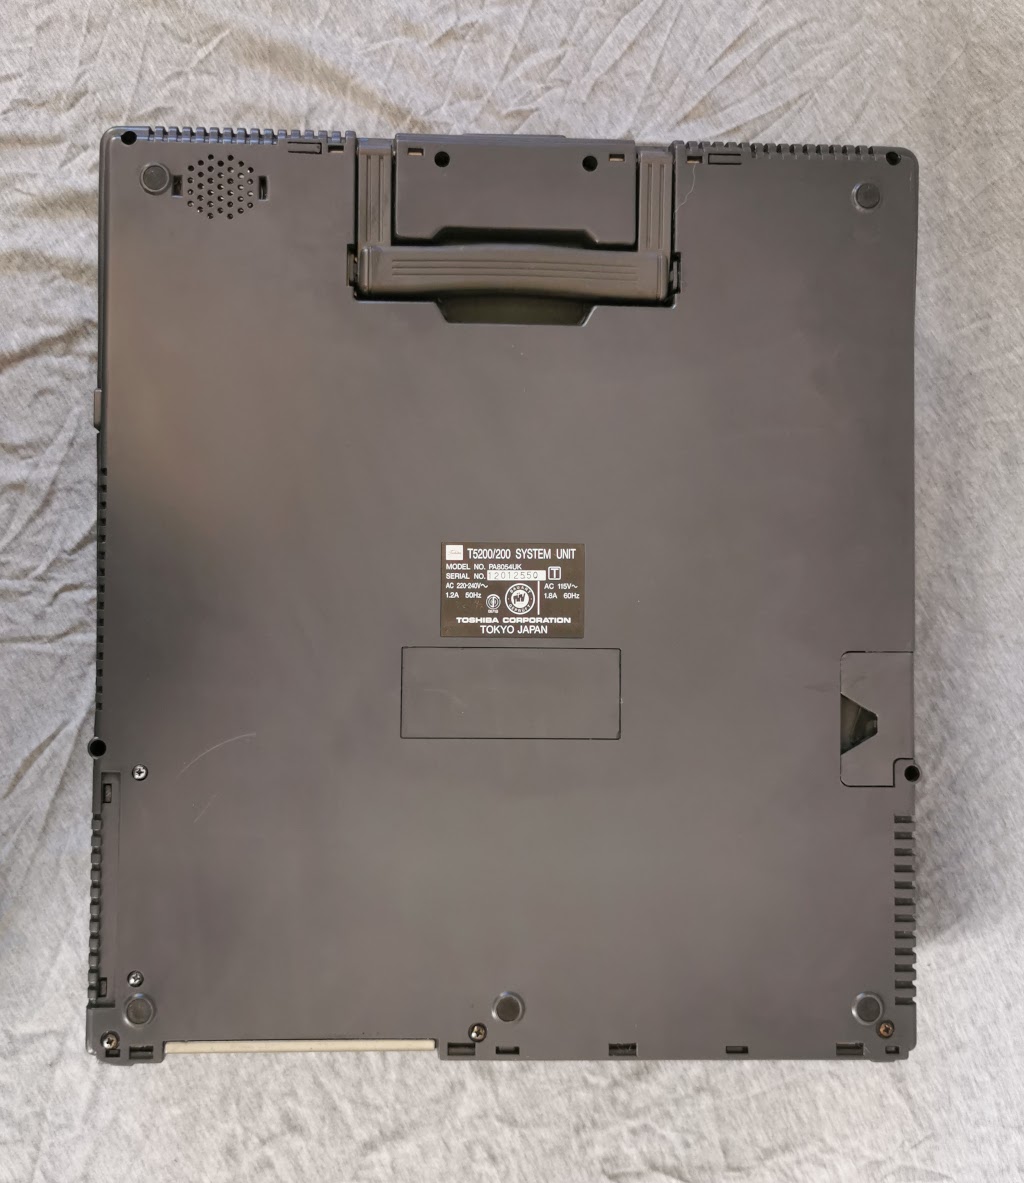 General overview of the underside of a Toshiba T5200